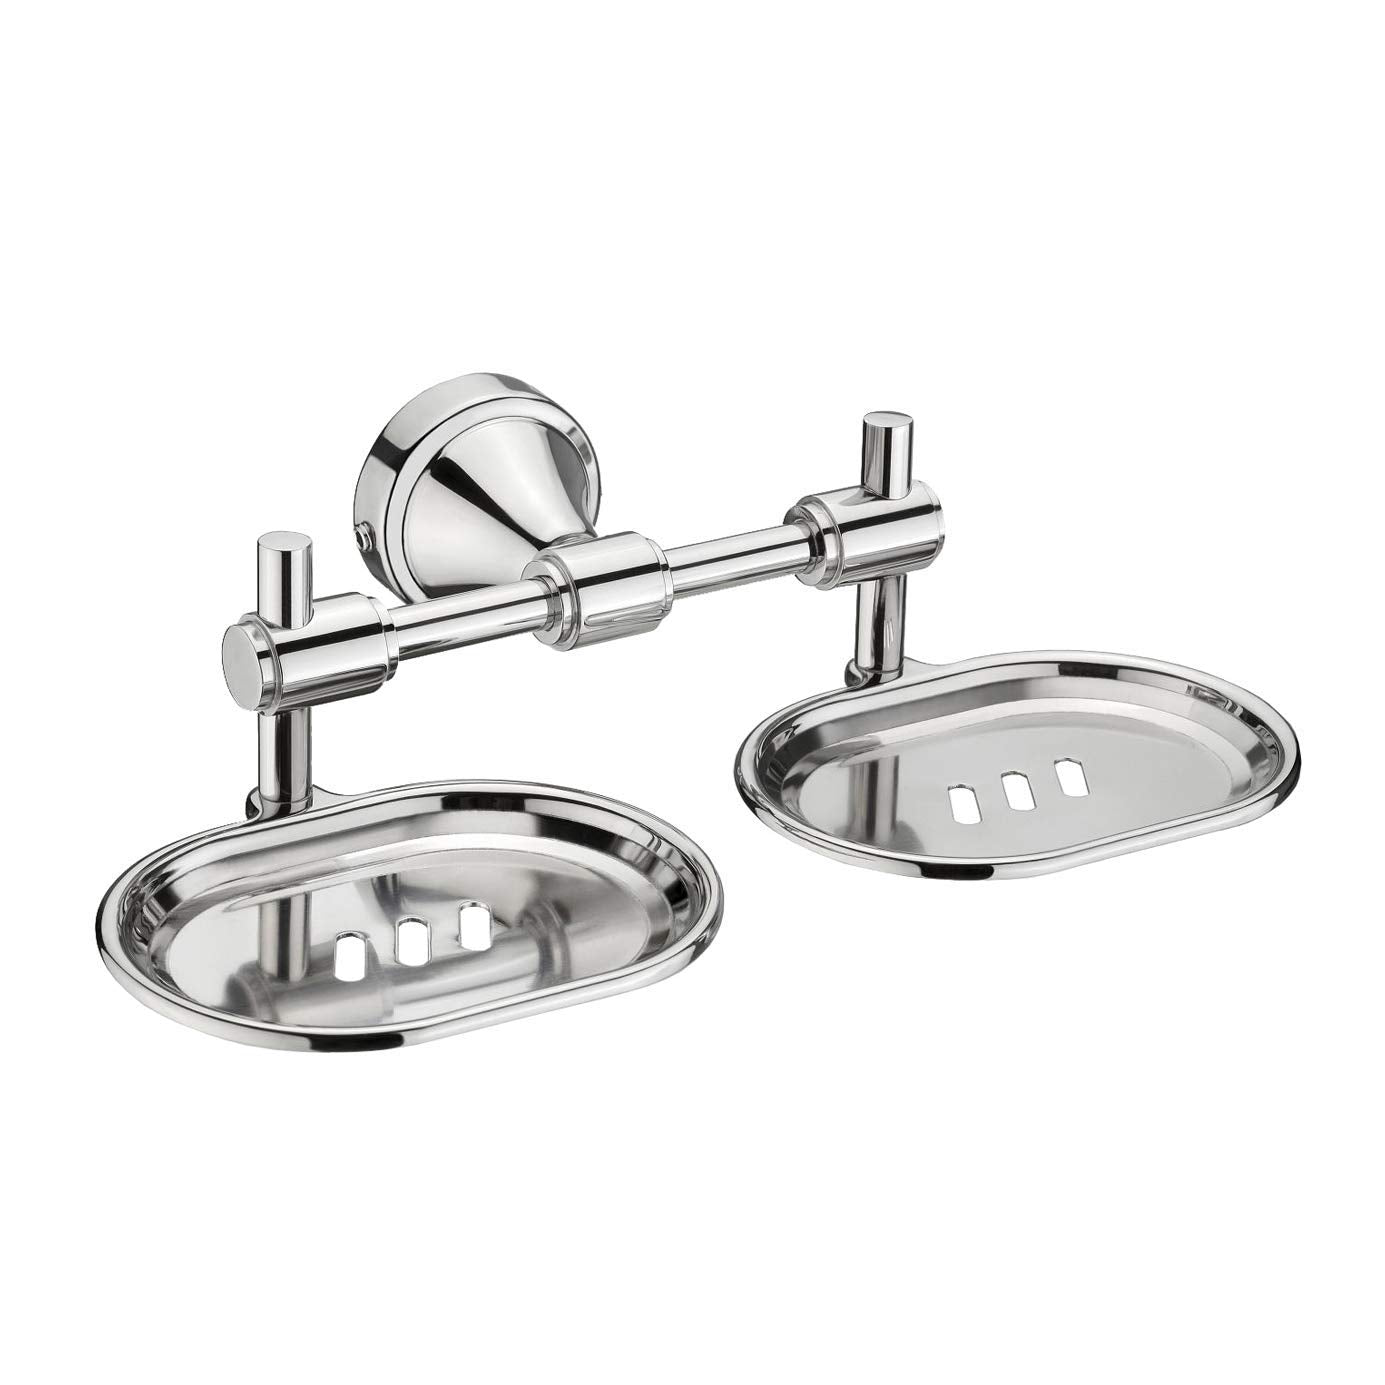 Plantex Stainless Steel 304 Grade Niko Double Soap Holder for Bathroom/Soap Dish/Bathroom Soap Stand/Bathroom Accessories(Chrome) - Pack of 2